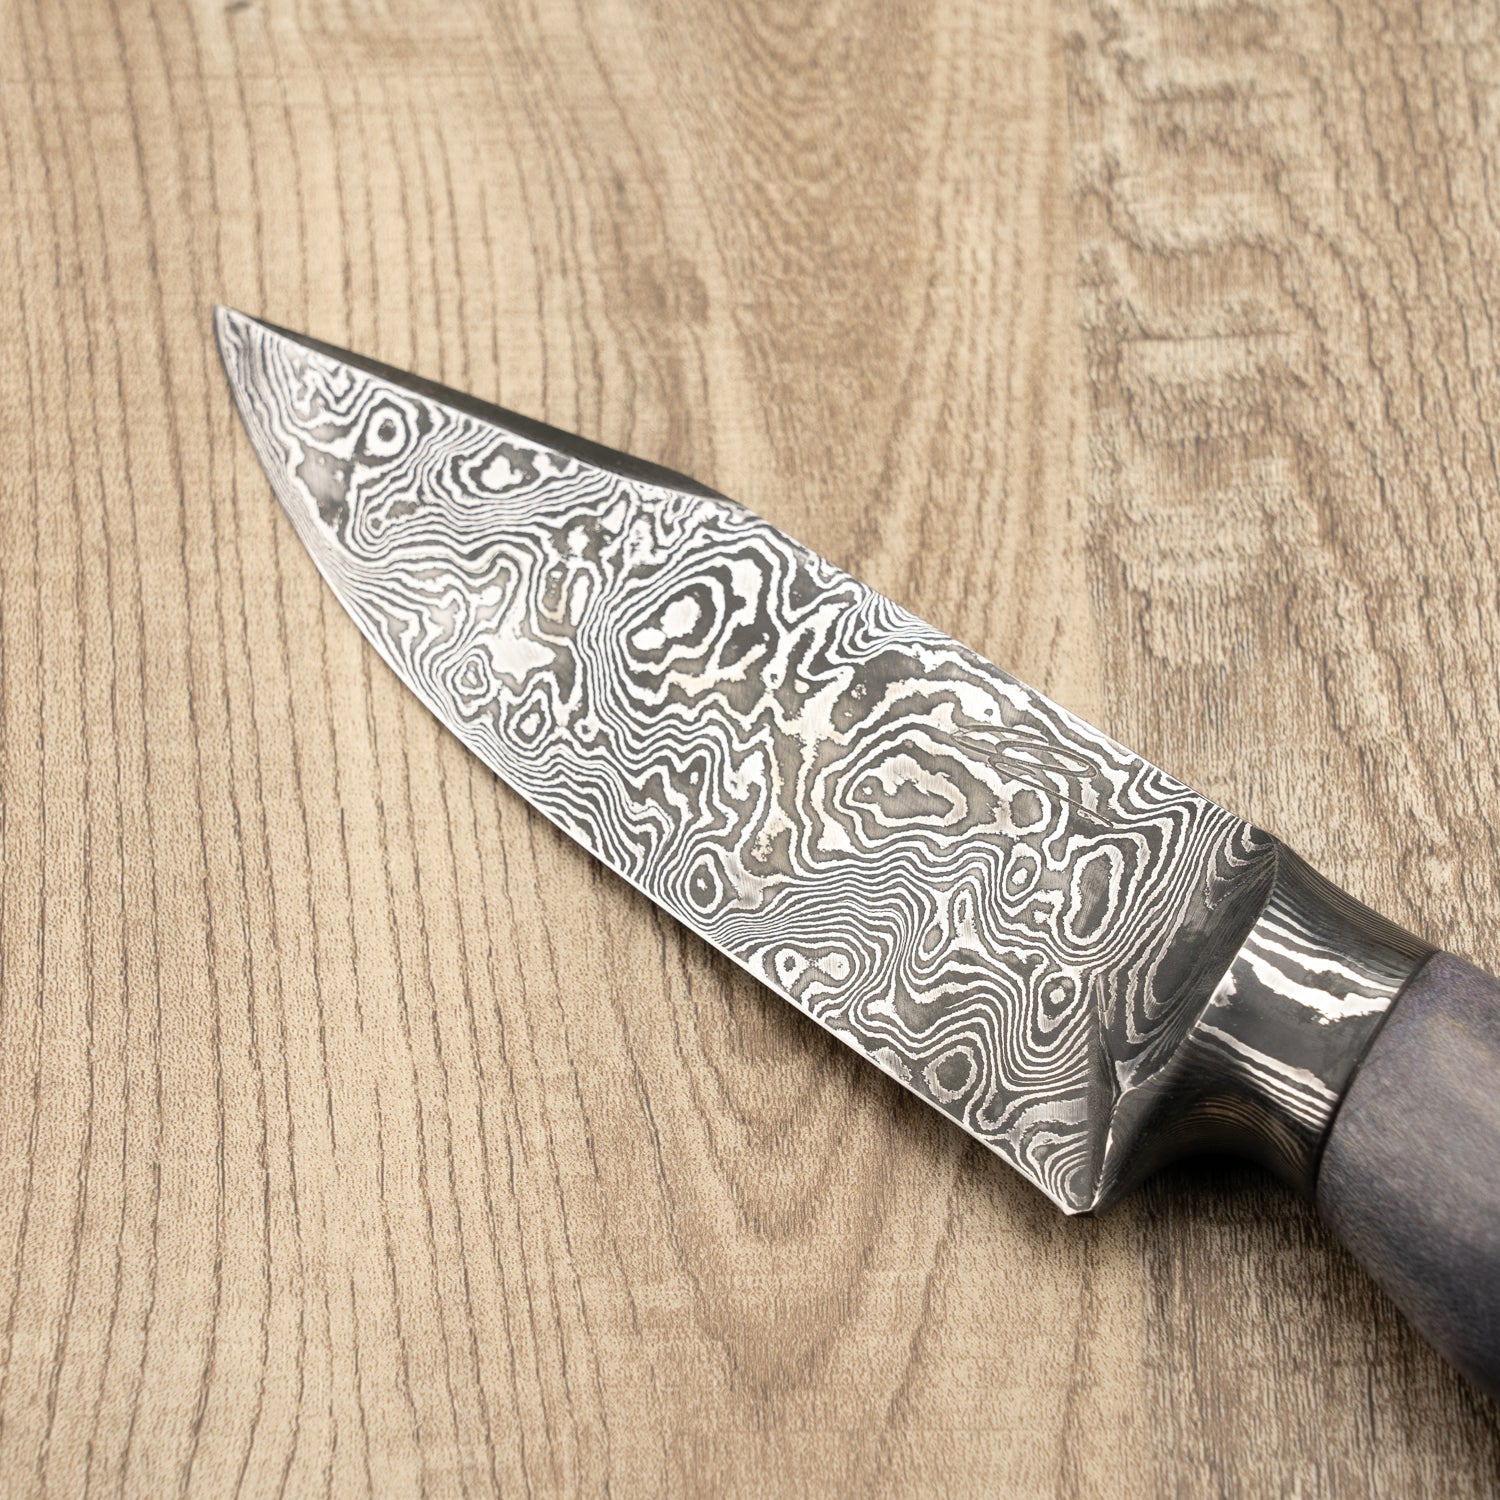 Damascus Hunting Knife Damascus Steel Classic Bowie Knife